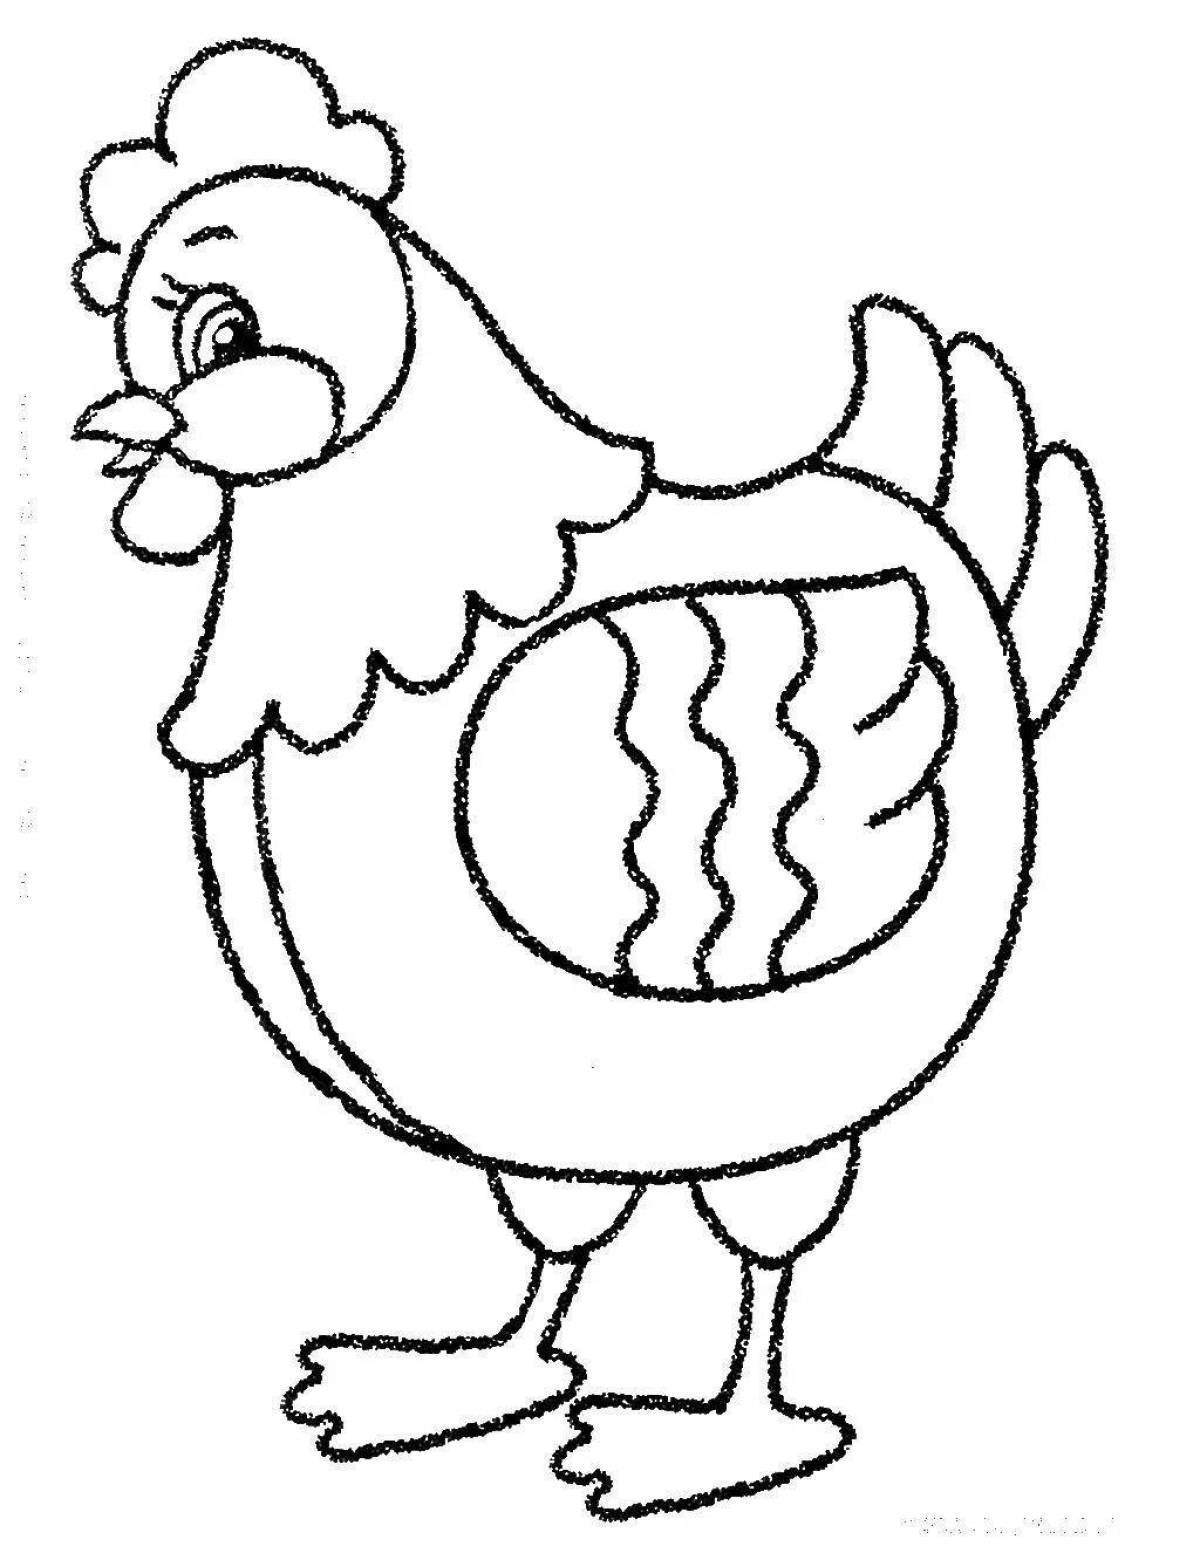 Adorable chick pockmarked coloring book for kids